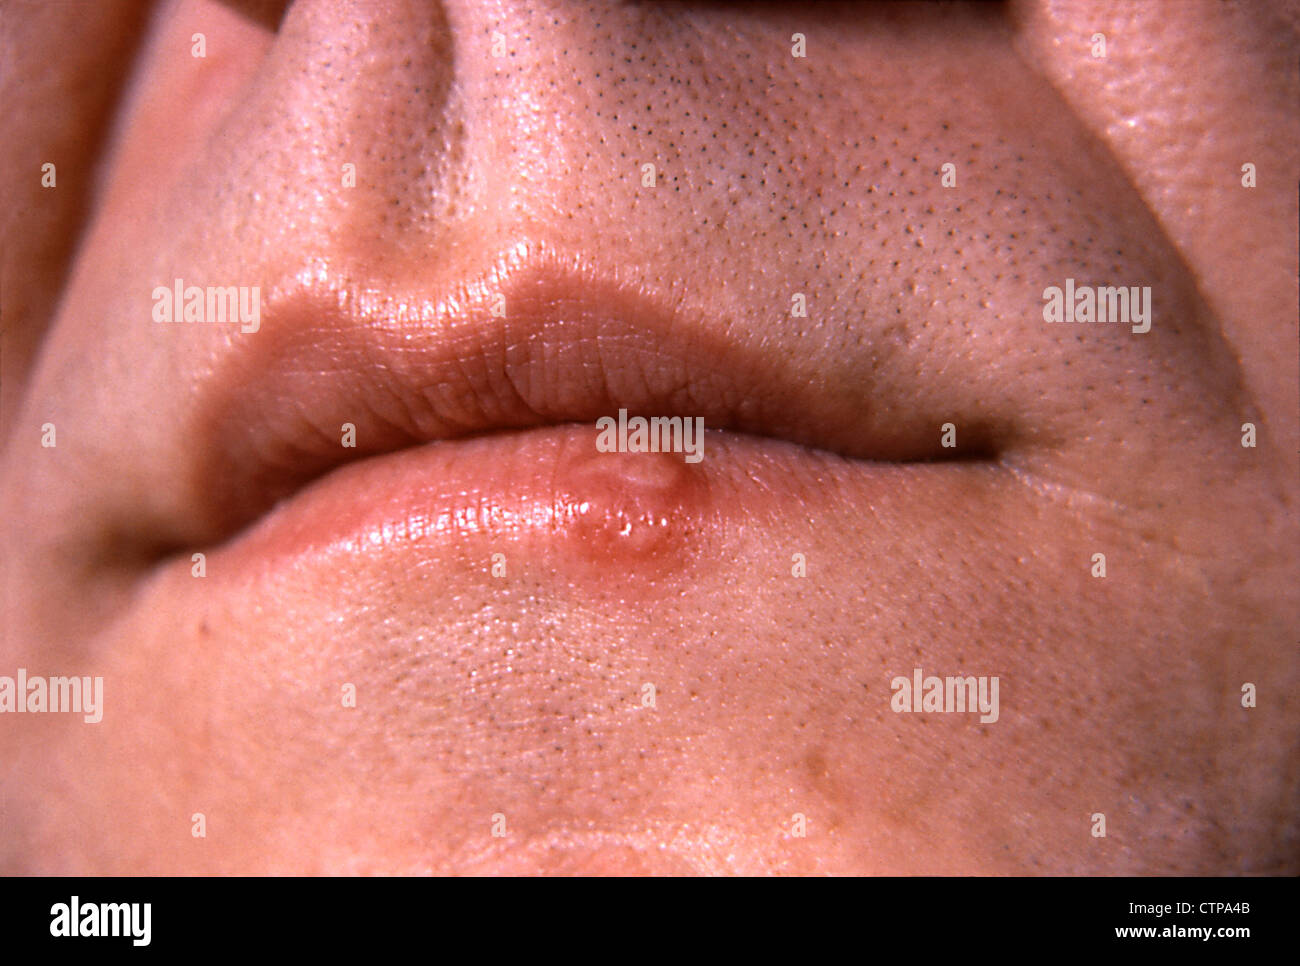 Cold sore or fever blister on the lip caused by Herpes infection Stock Photo